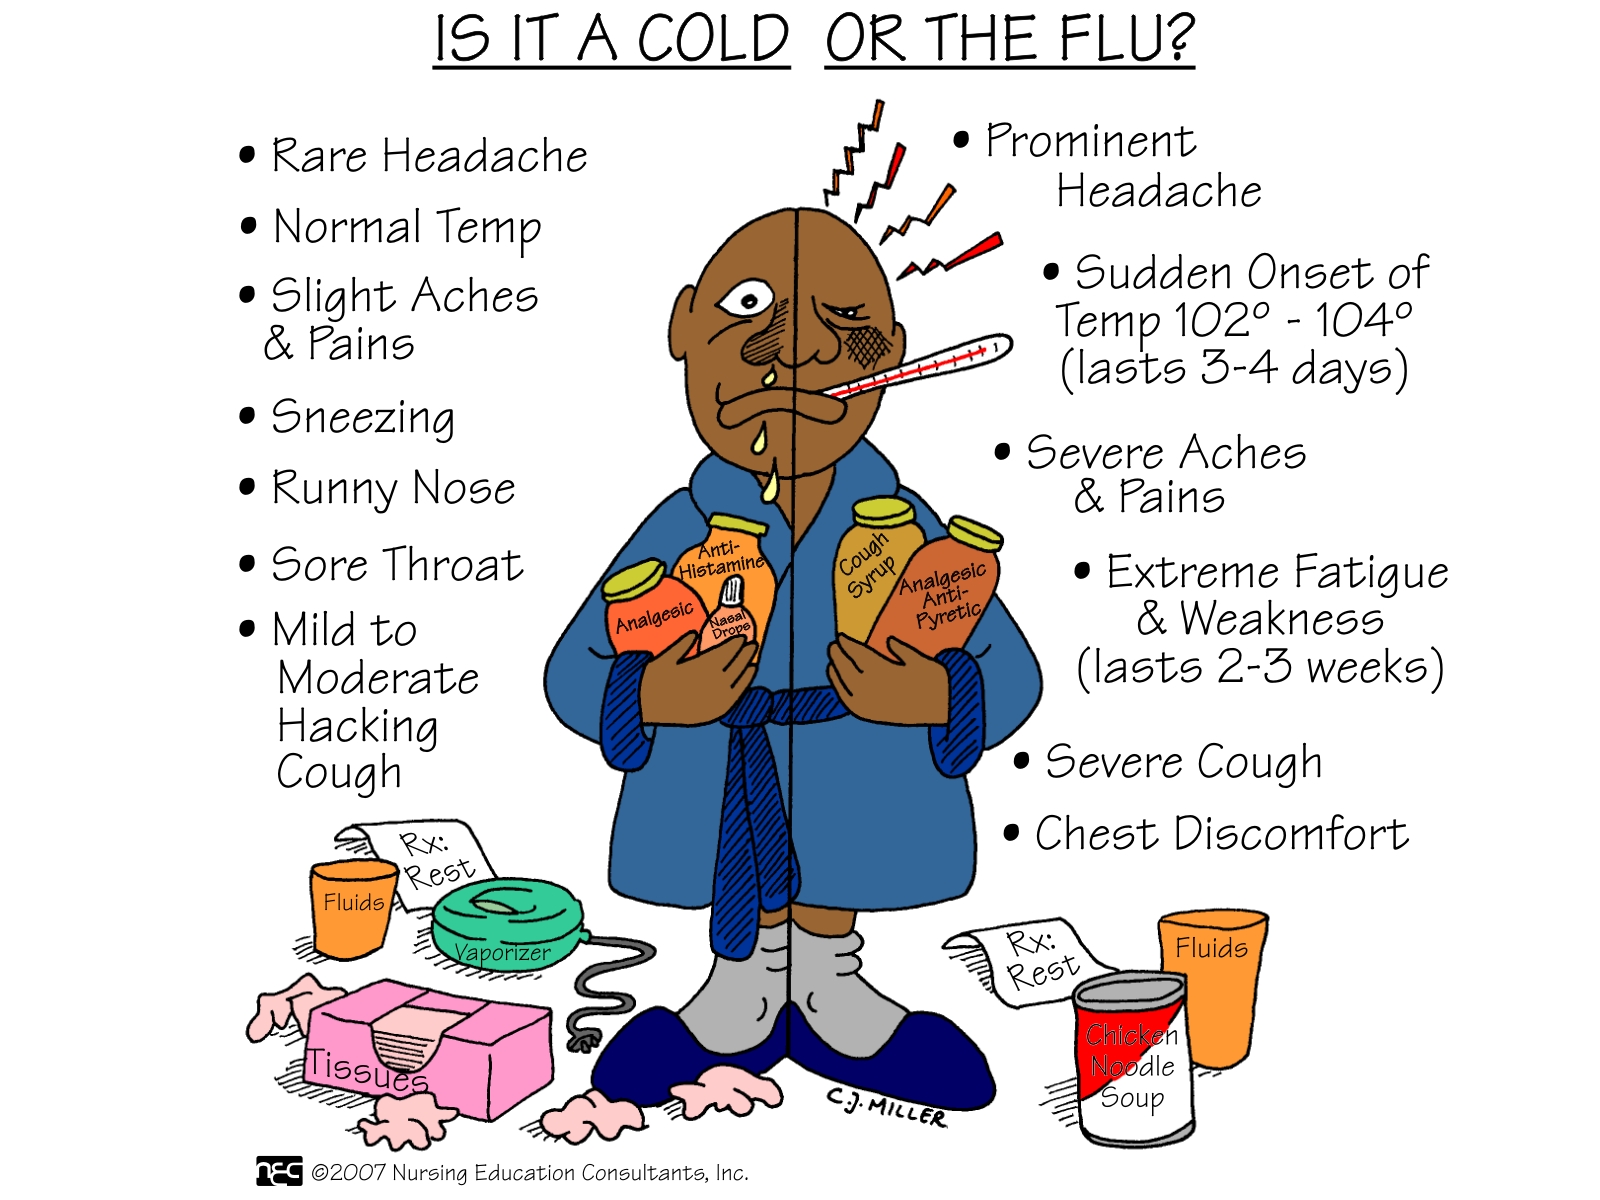 Cold and Flu Season is Coming!!